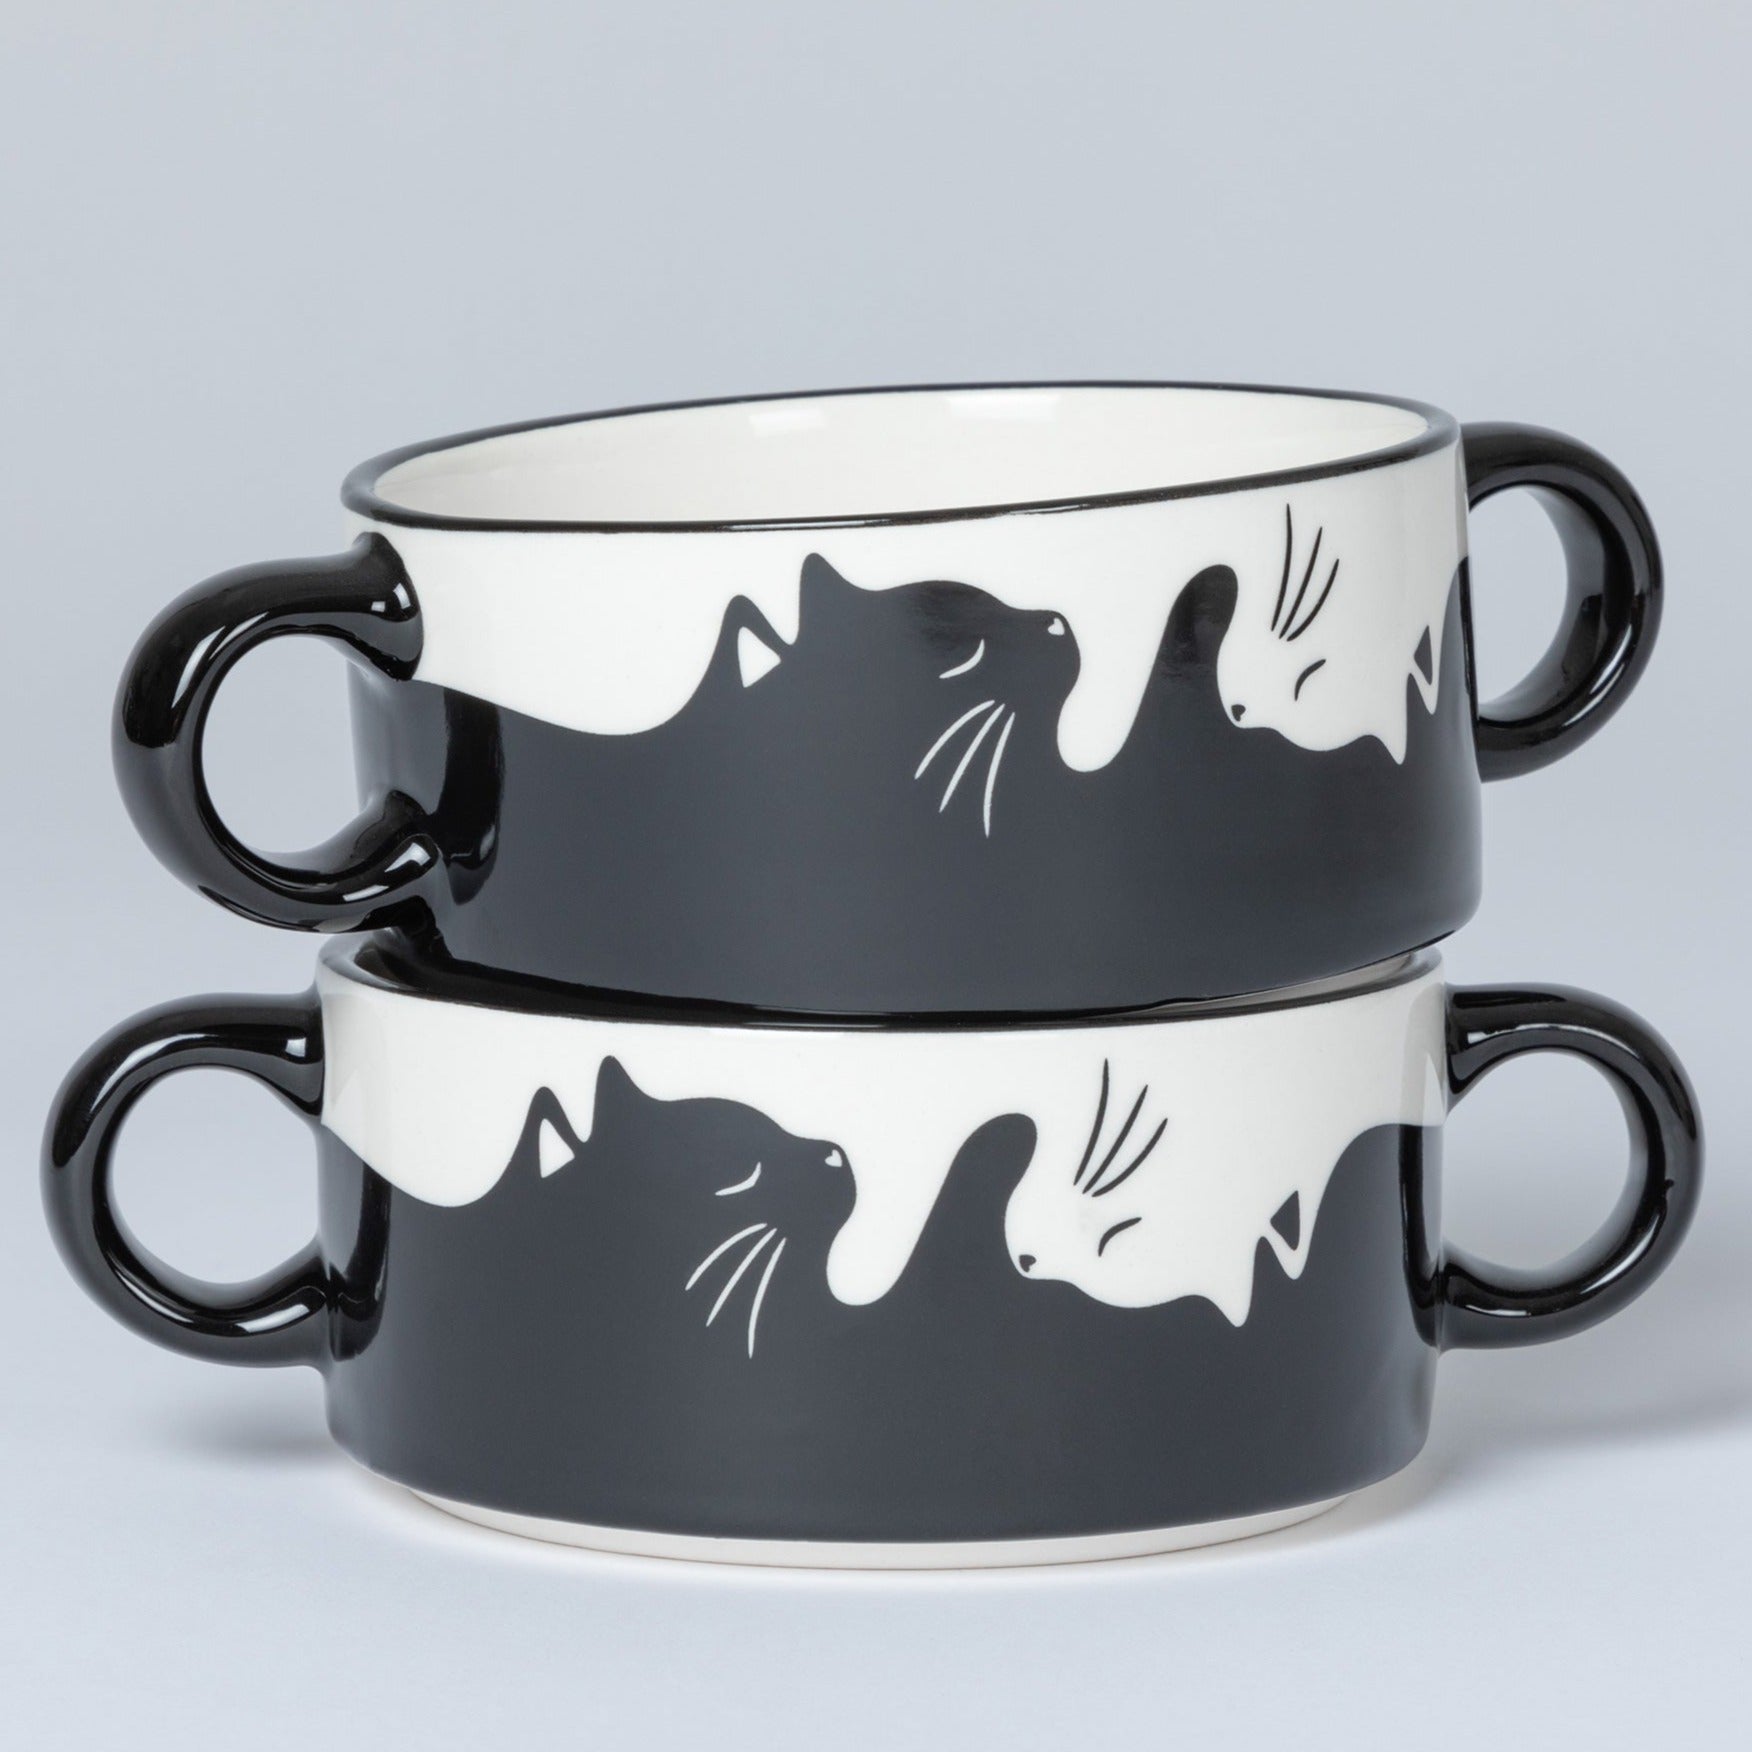 Double Handle Soup Cups - Set of 2